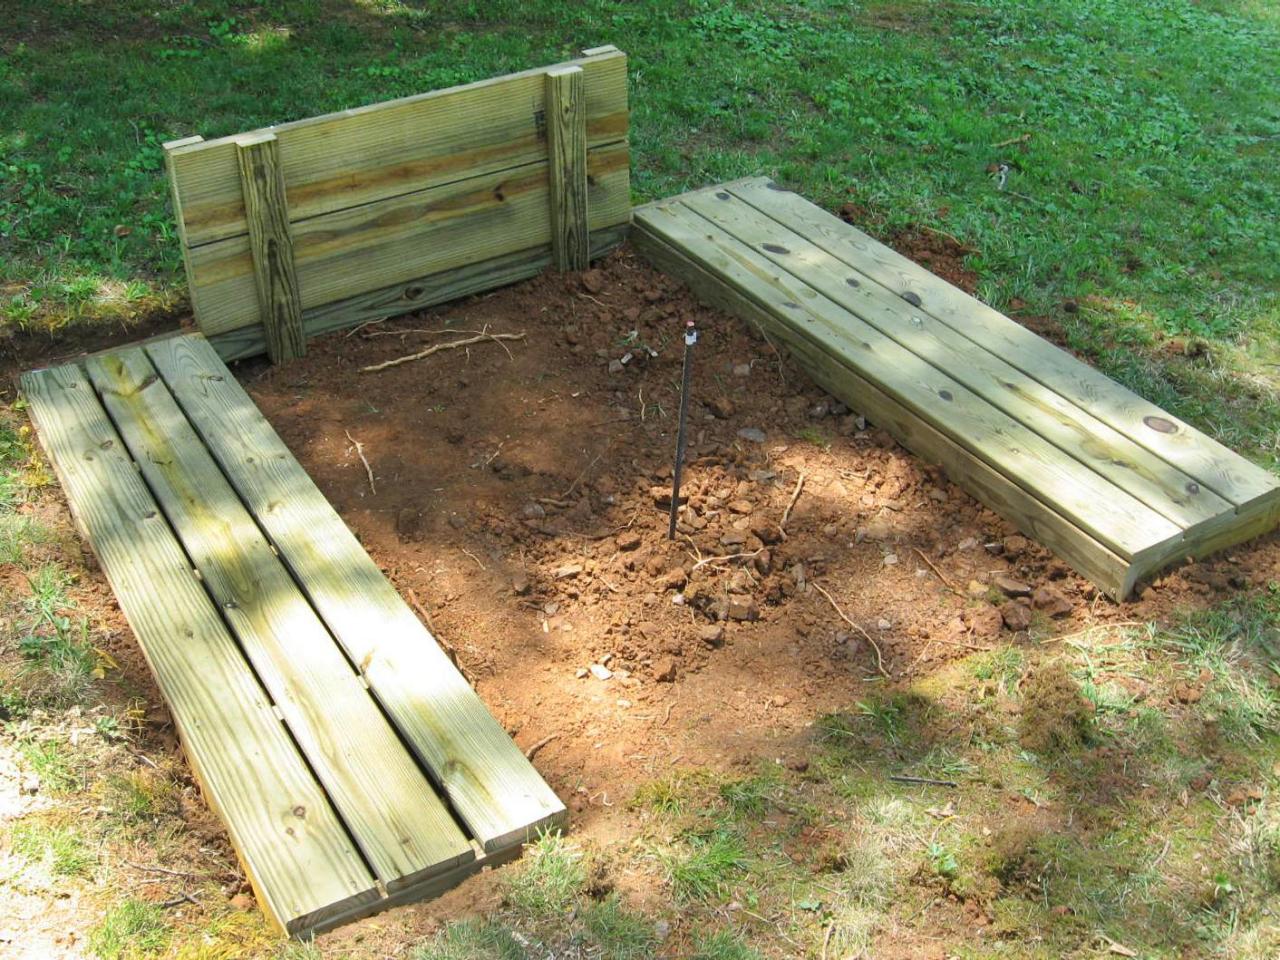 How to Build a Horseshoe Pit | how-tos | DIY